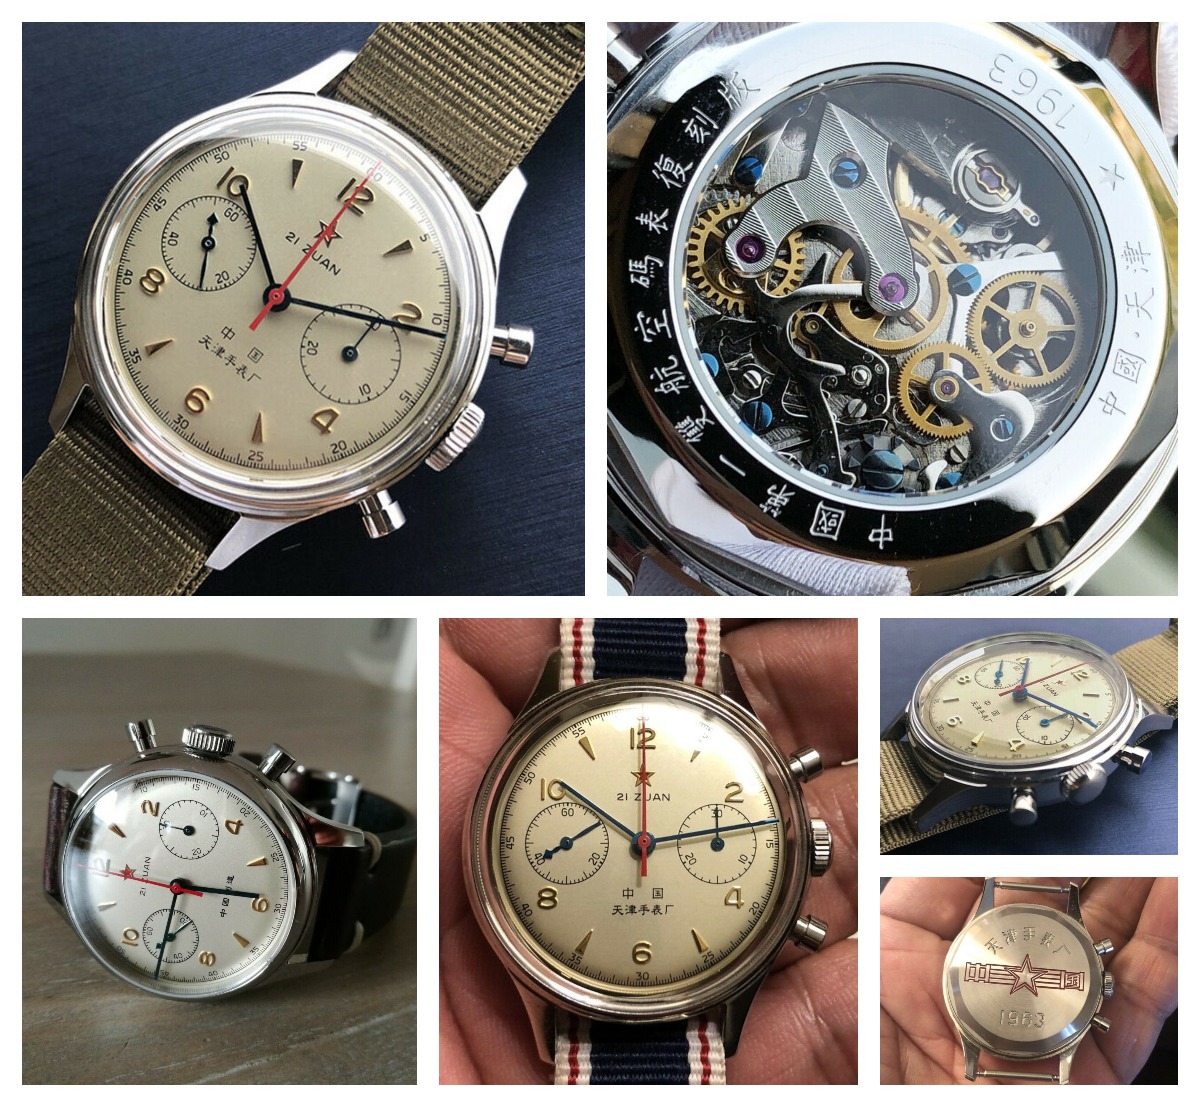 The Seagull 1963 manual wind chronograph. Available now on eBay.